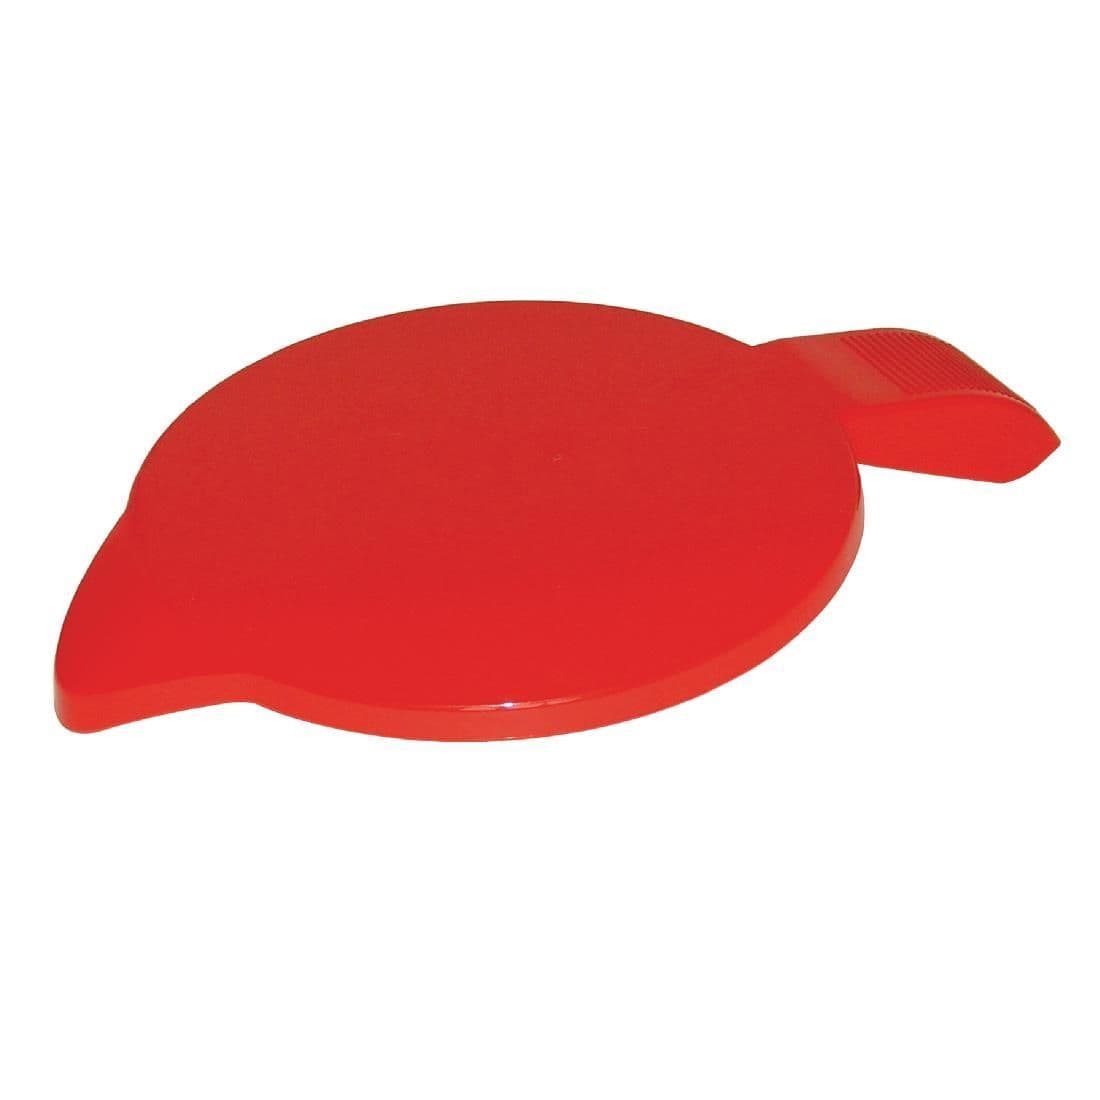 Lid for Kristallon 1.4 Litre Polycarbonate Jug Red JD Catering Equipment Solutions Ltd